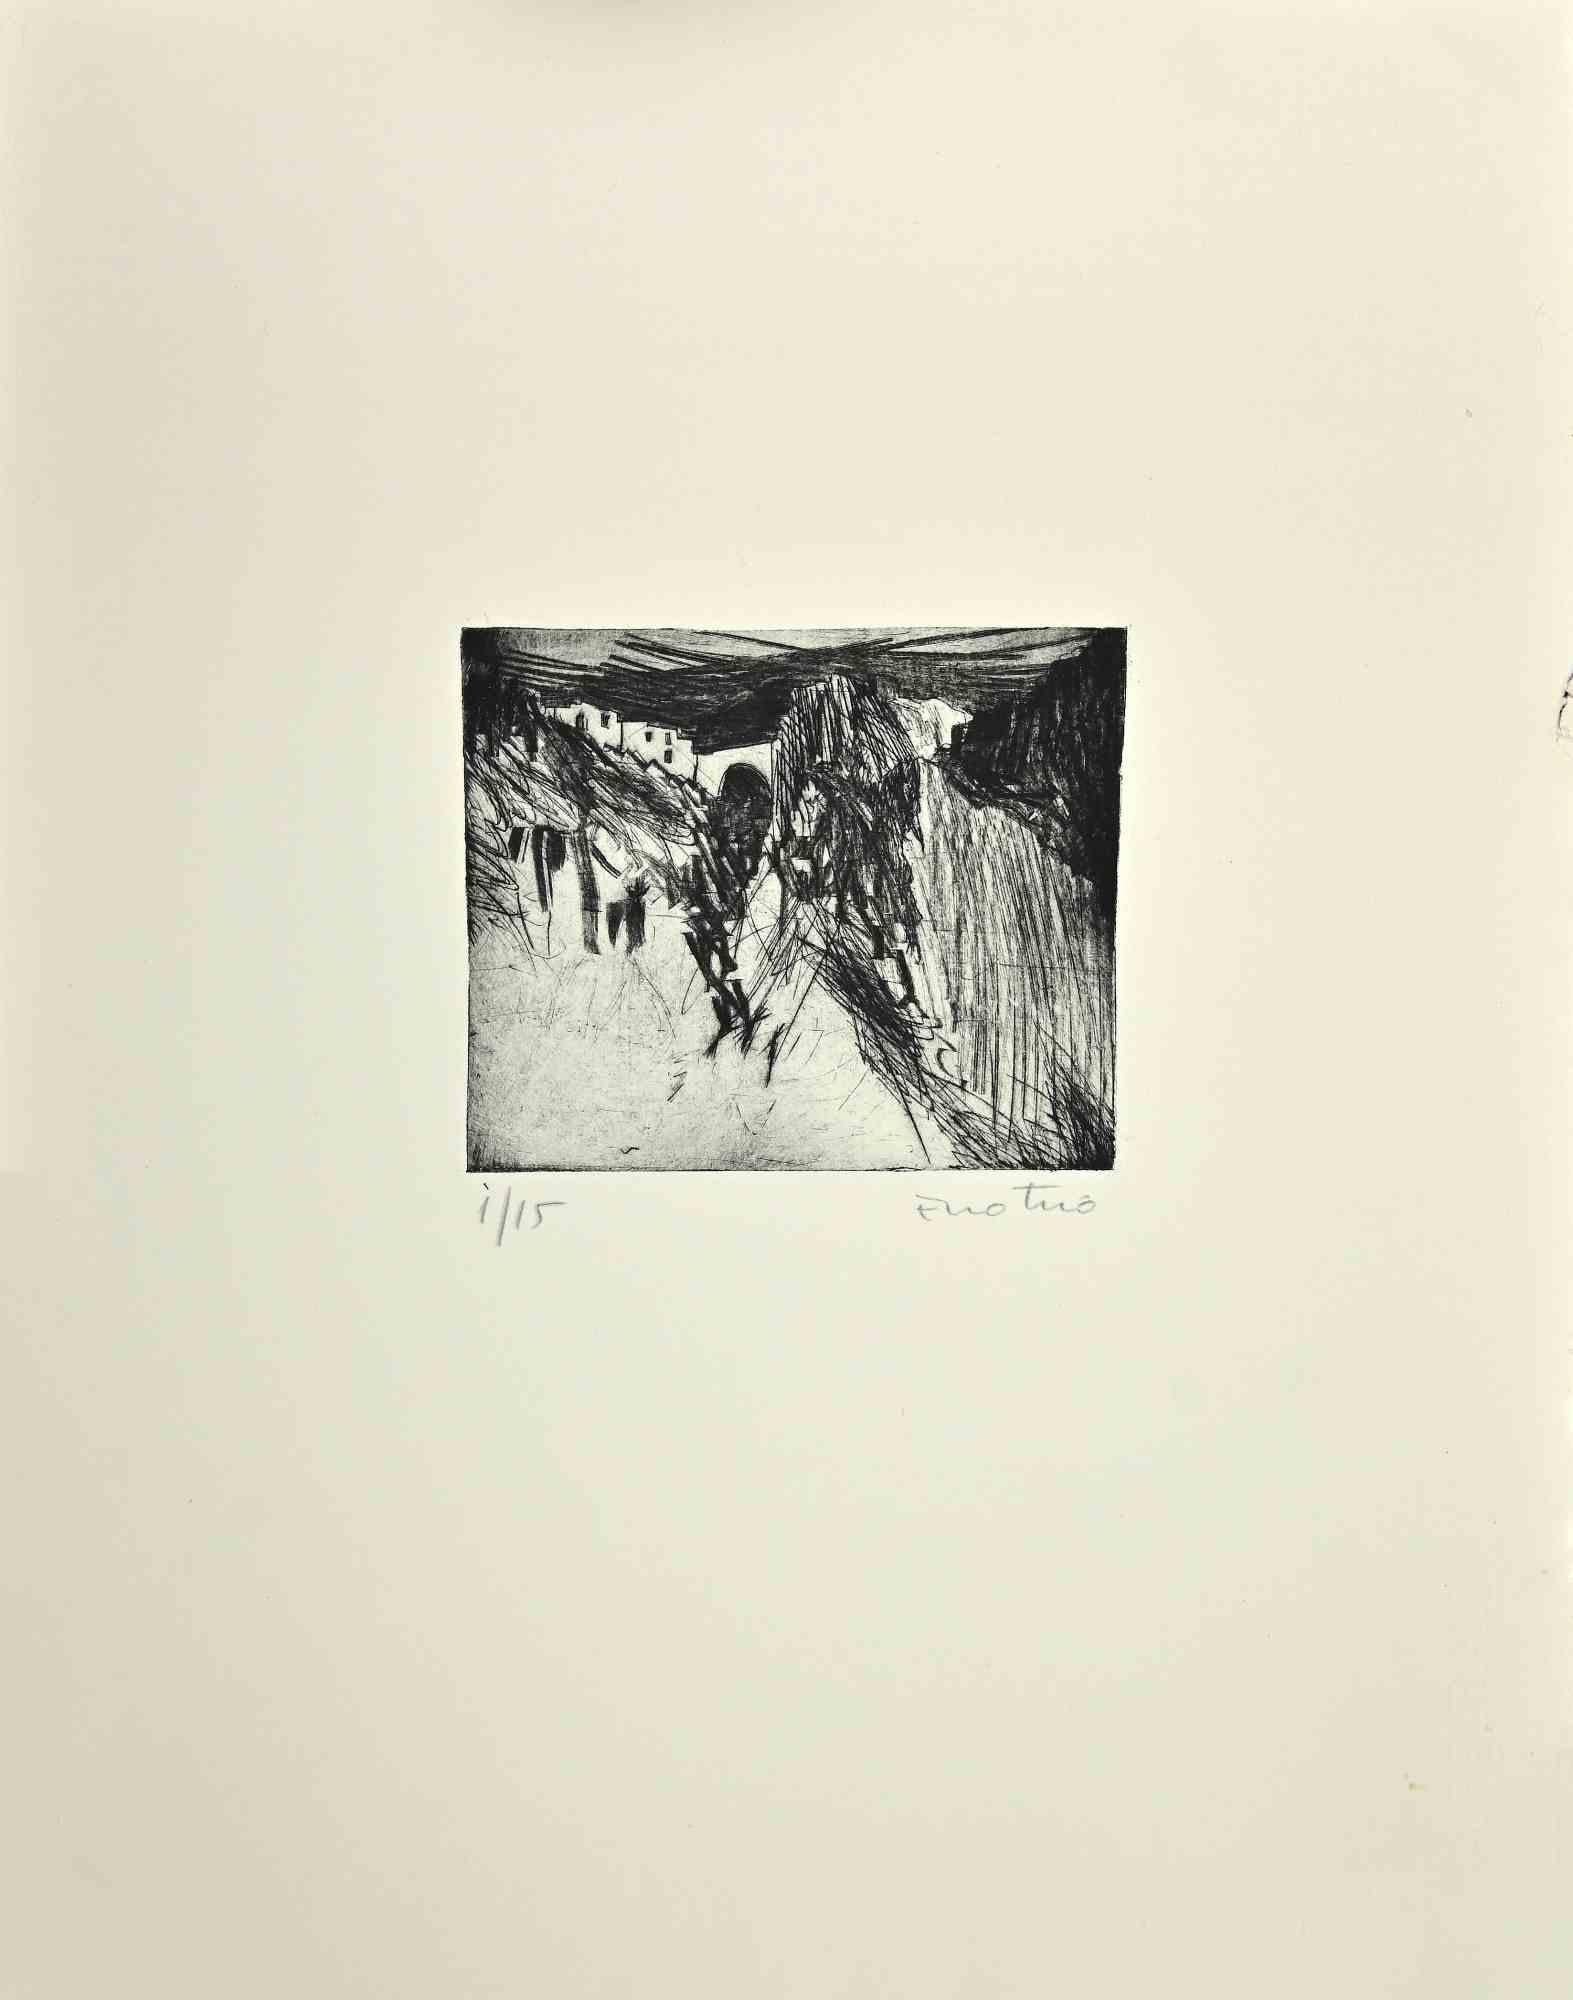 Landscape is an Etching and Aquatint realized by Enotrio Pugliese in 1967.

Hand-signed by the artist on the lower.

Numbered, Limited edition of 15 prints.

Good conditions with original cutting of the paper on the right margin.

Enotrio Pugliese